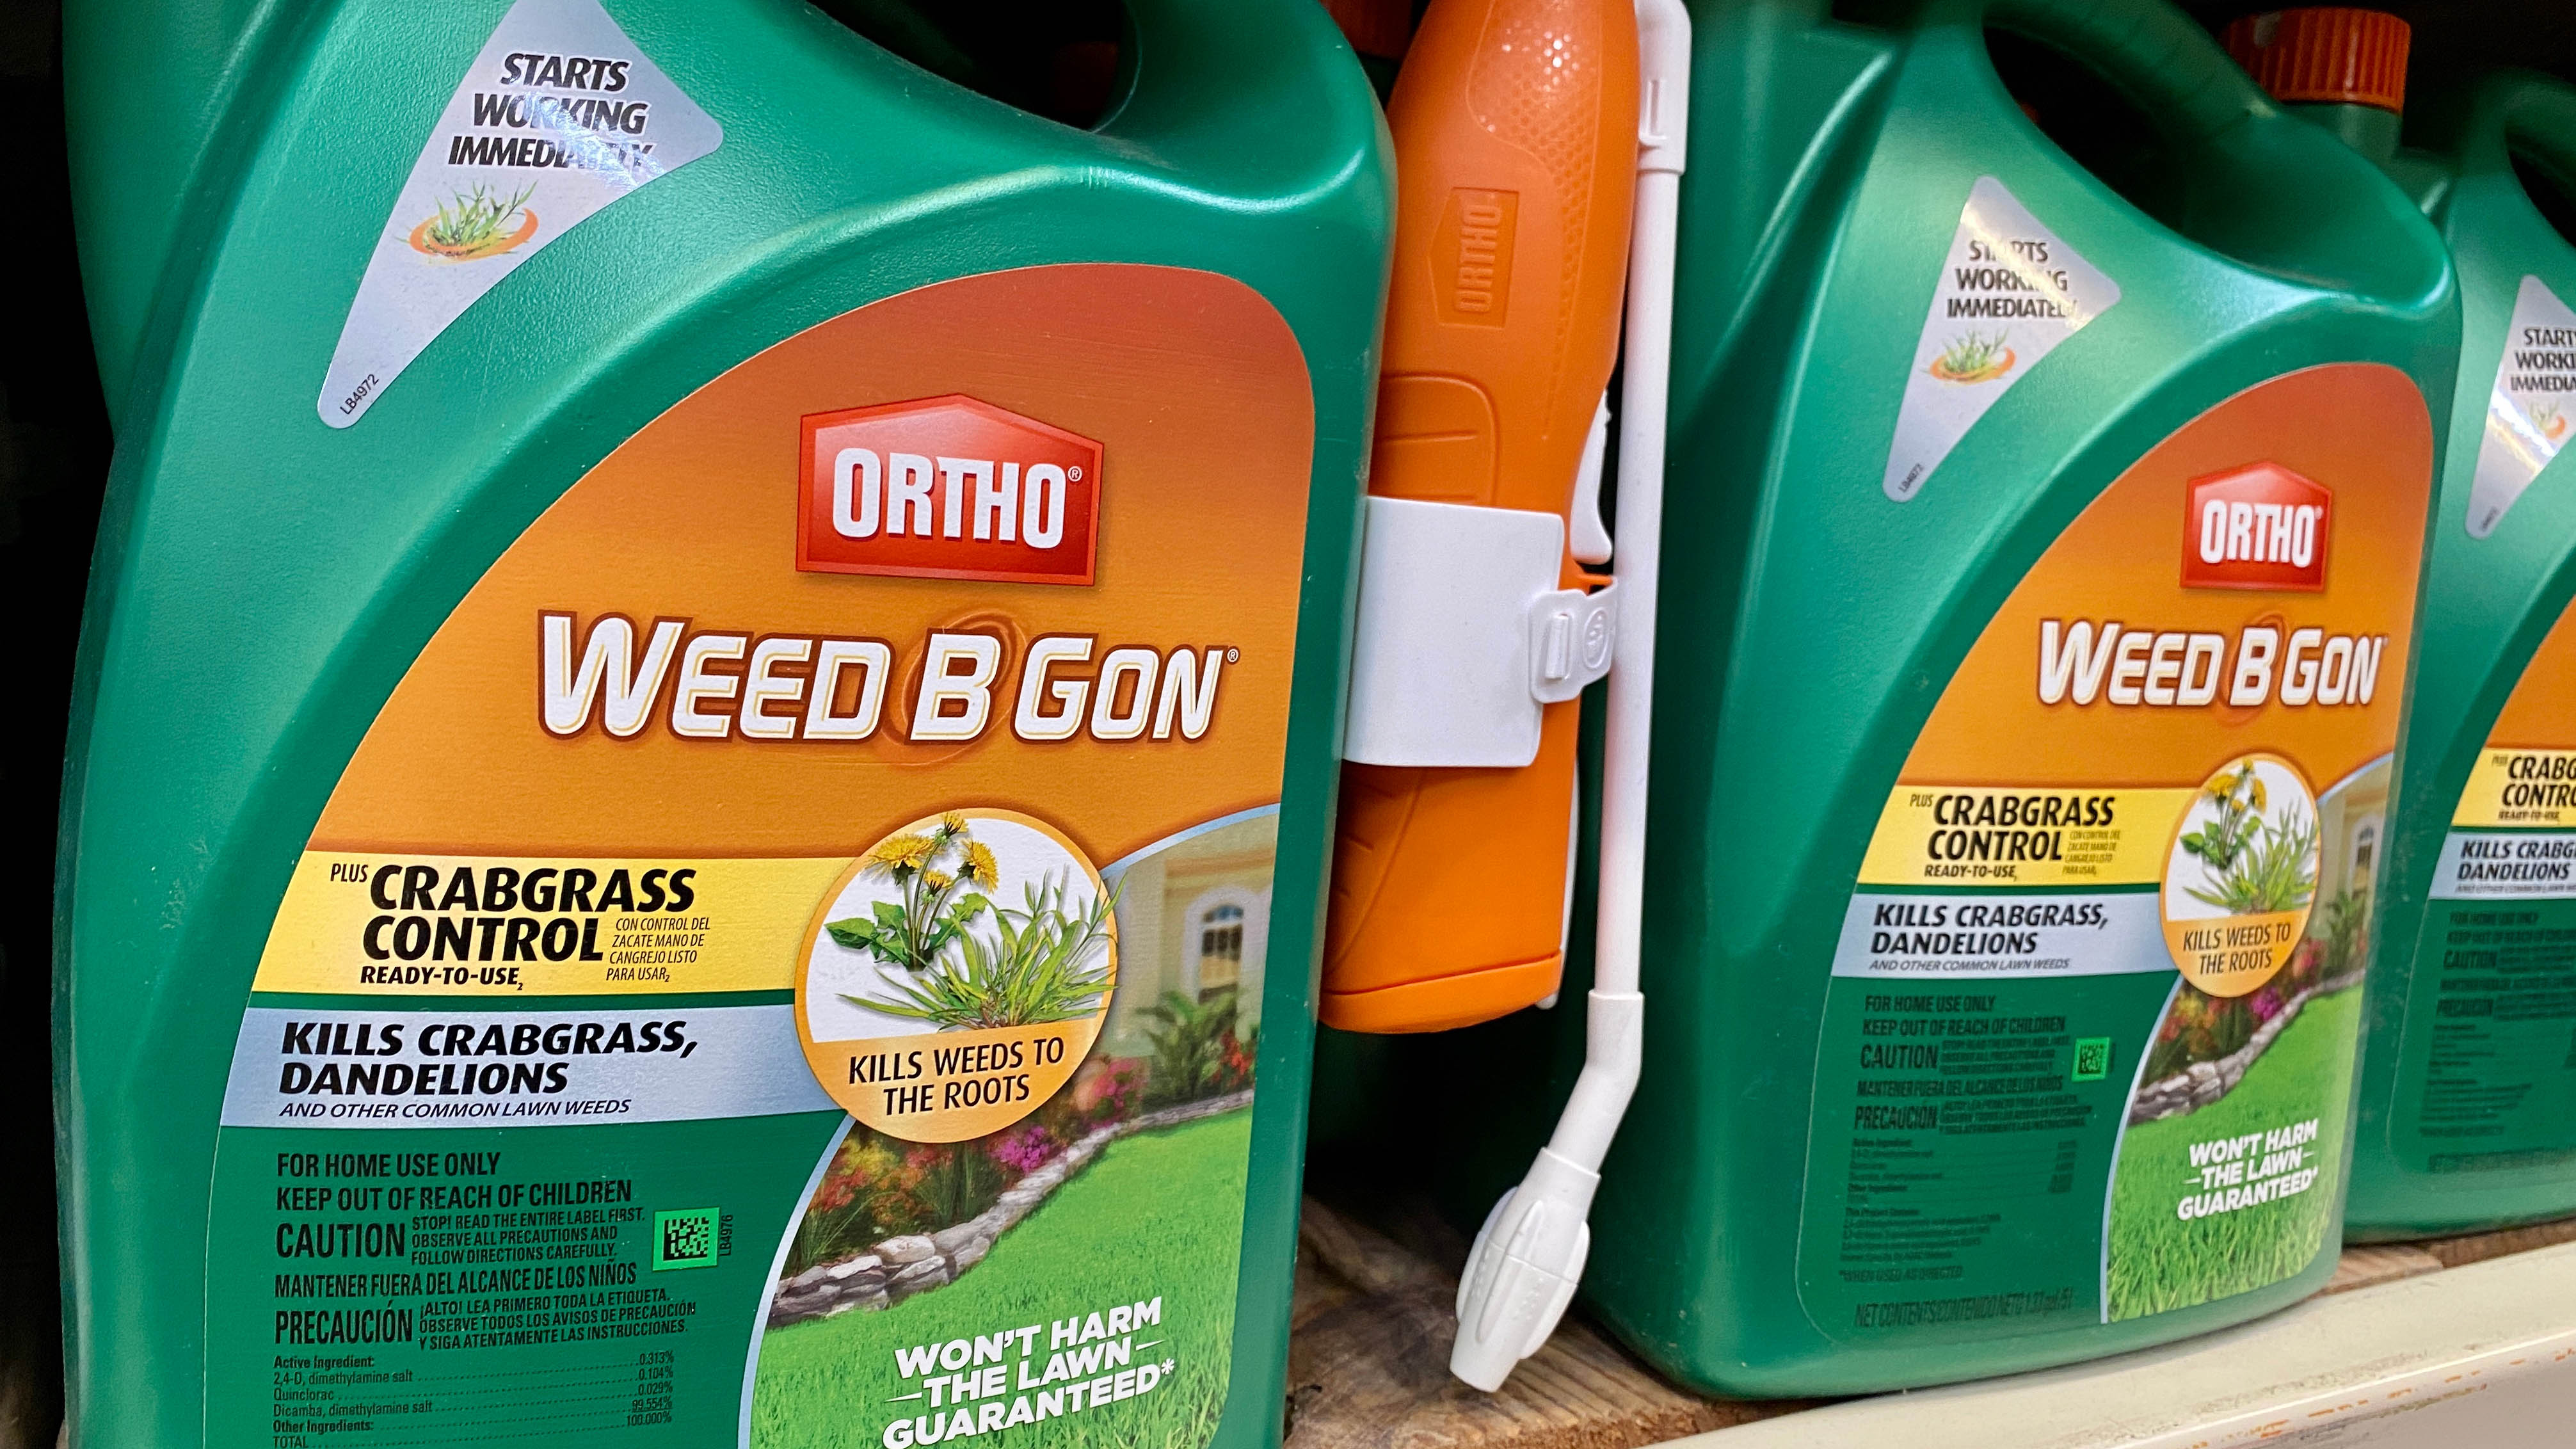 Two bottles of postemergence herbicide designed to kill crabgrass without harming the lawn